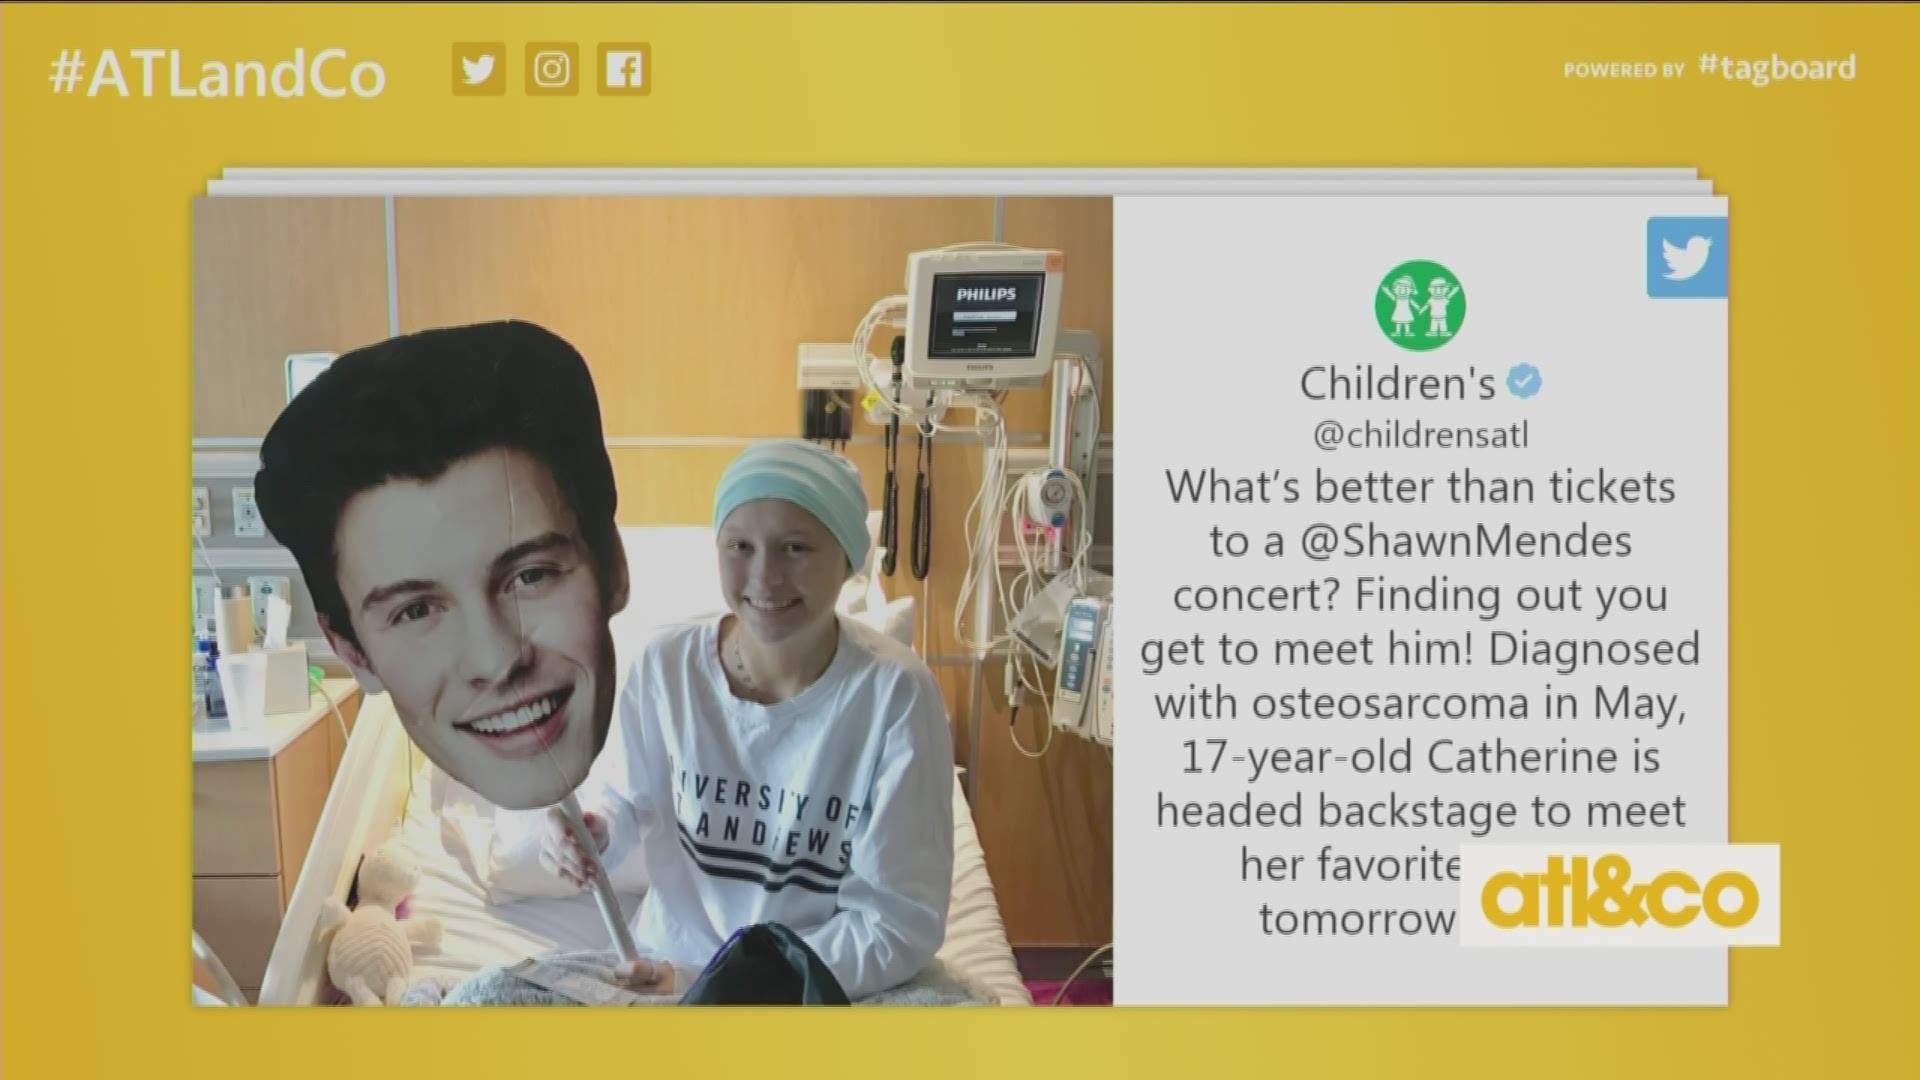 17-year-old Catherine at Children's Healthcare of Atlanta is meeting her idol Shawn Mendes tonight at State Farm Arena!